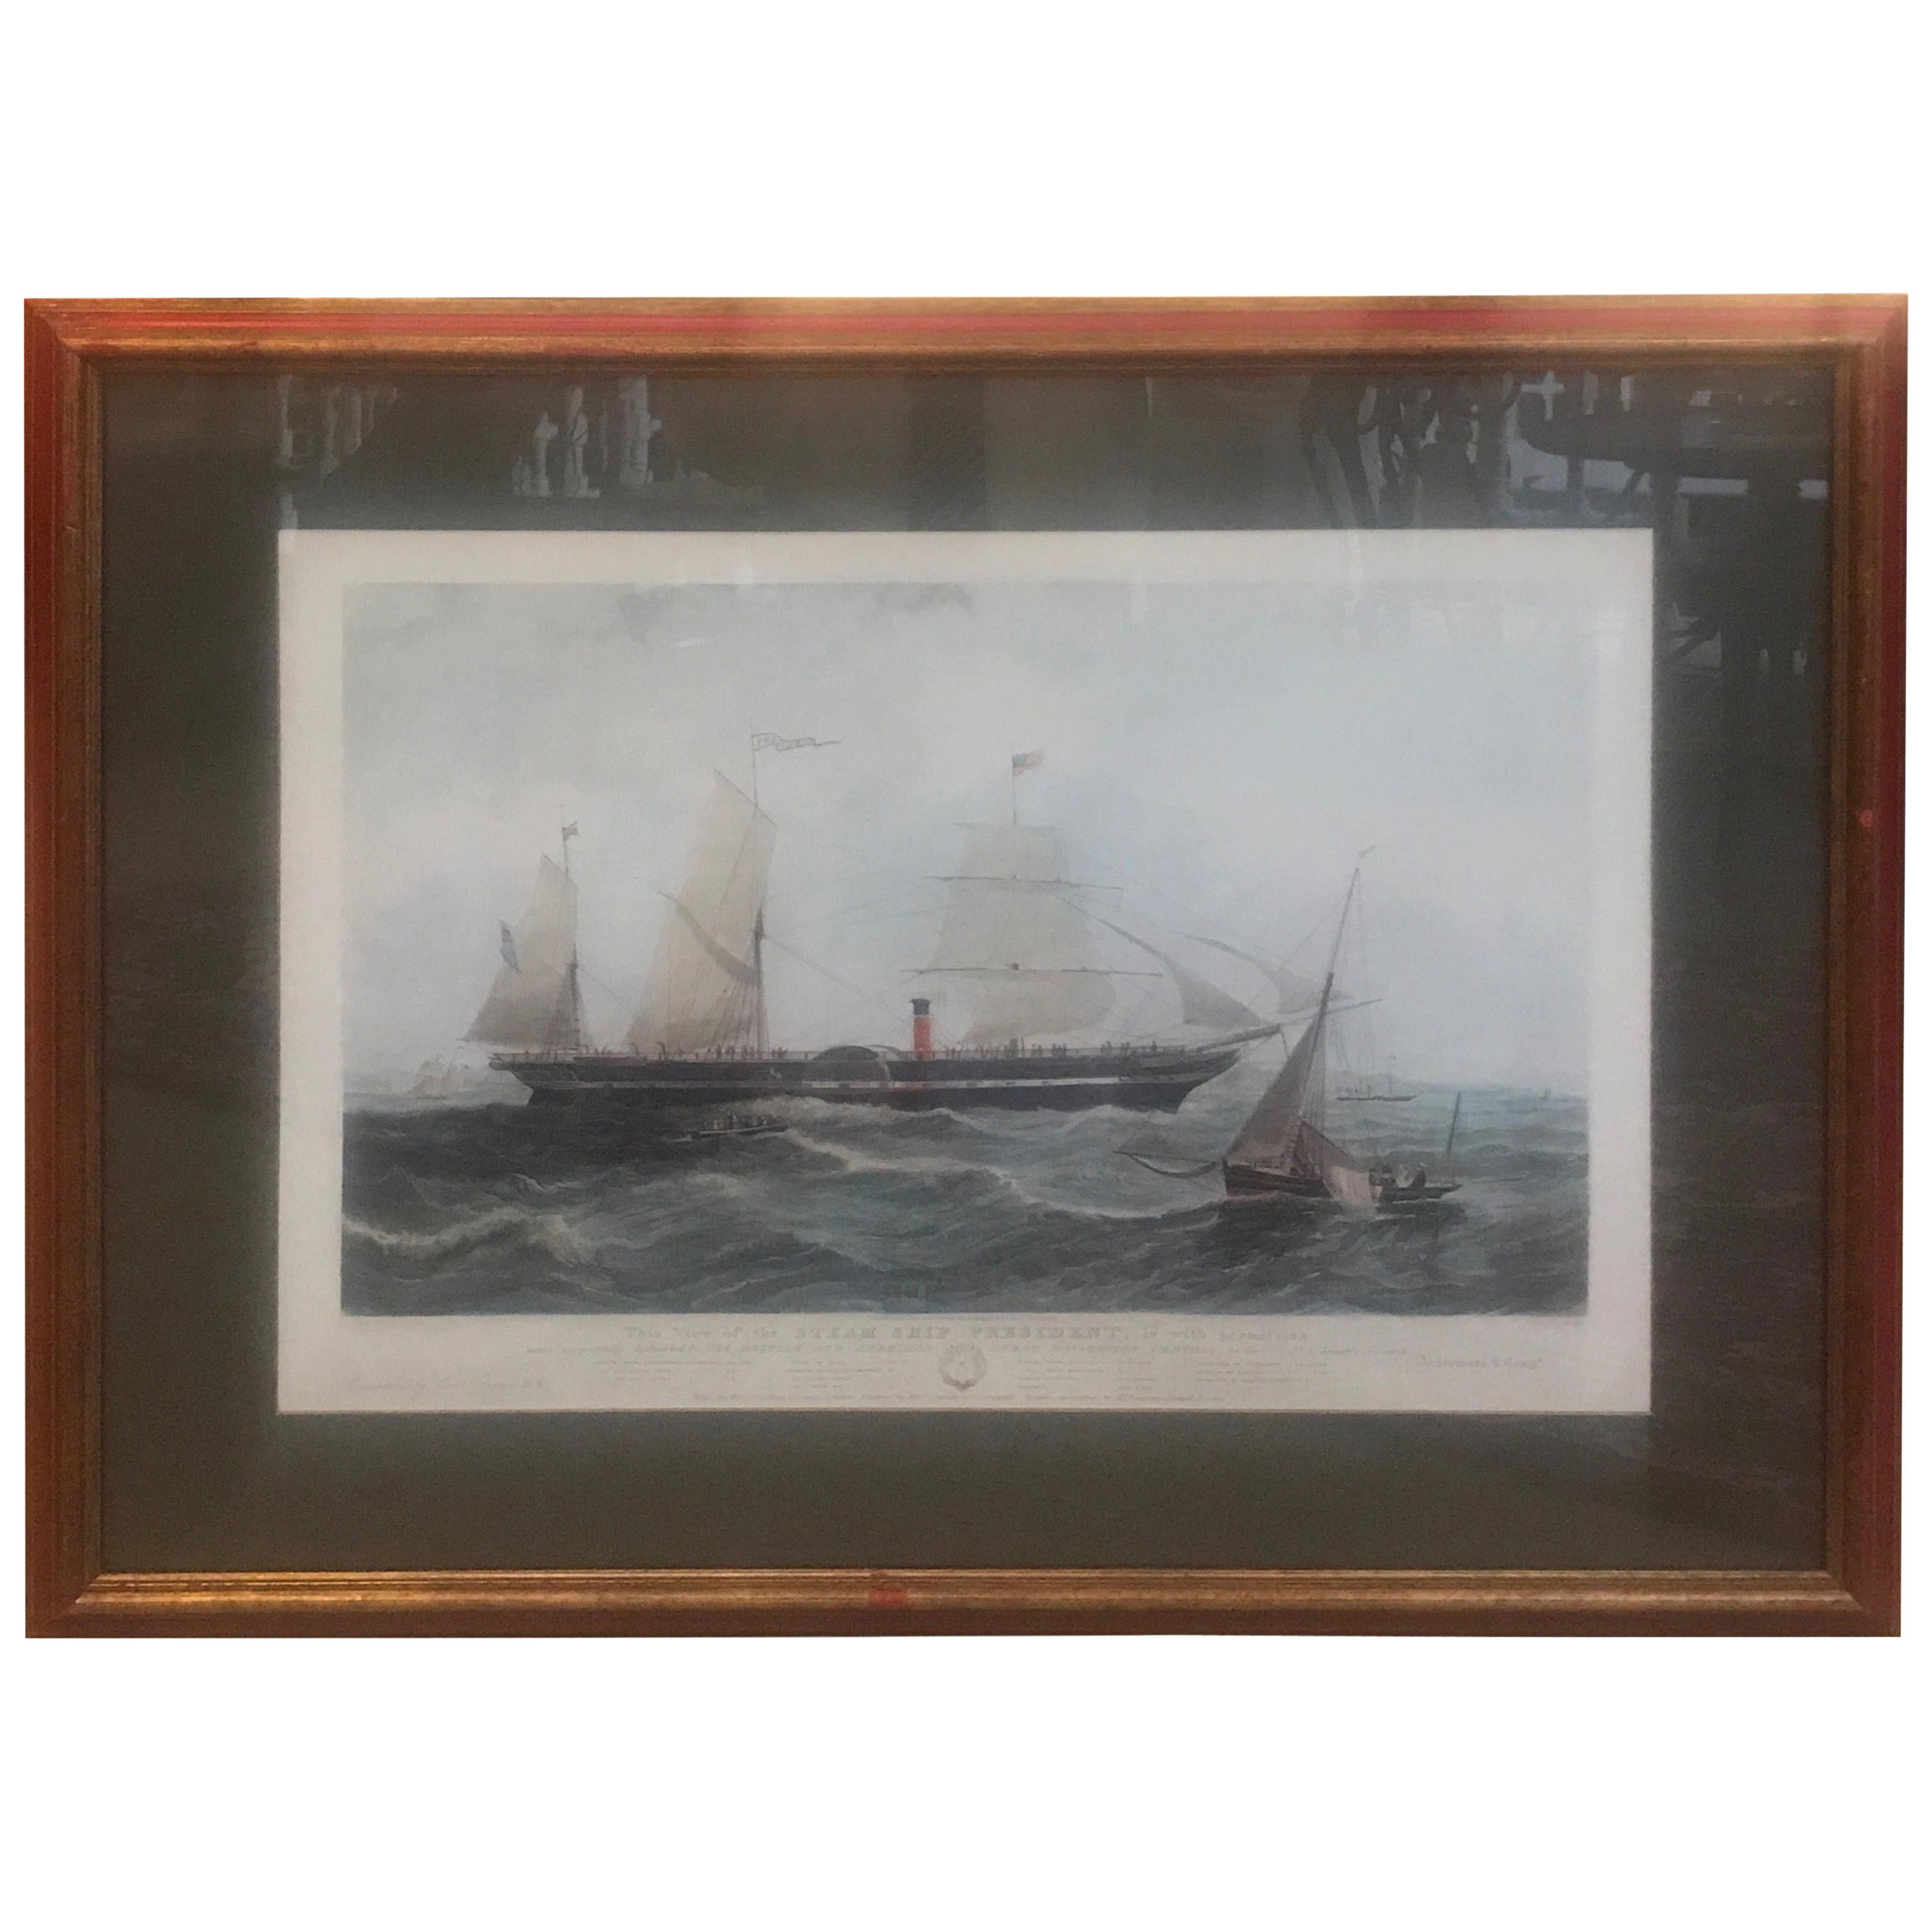 Antique American Nautical Sailboat Hand Colored Engraving